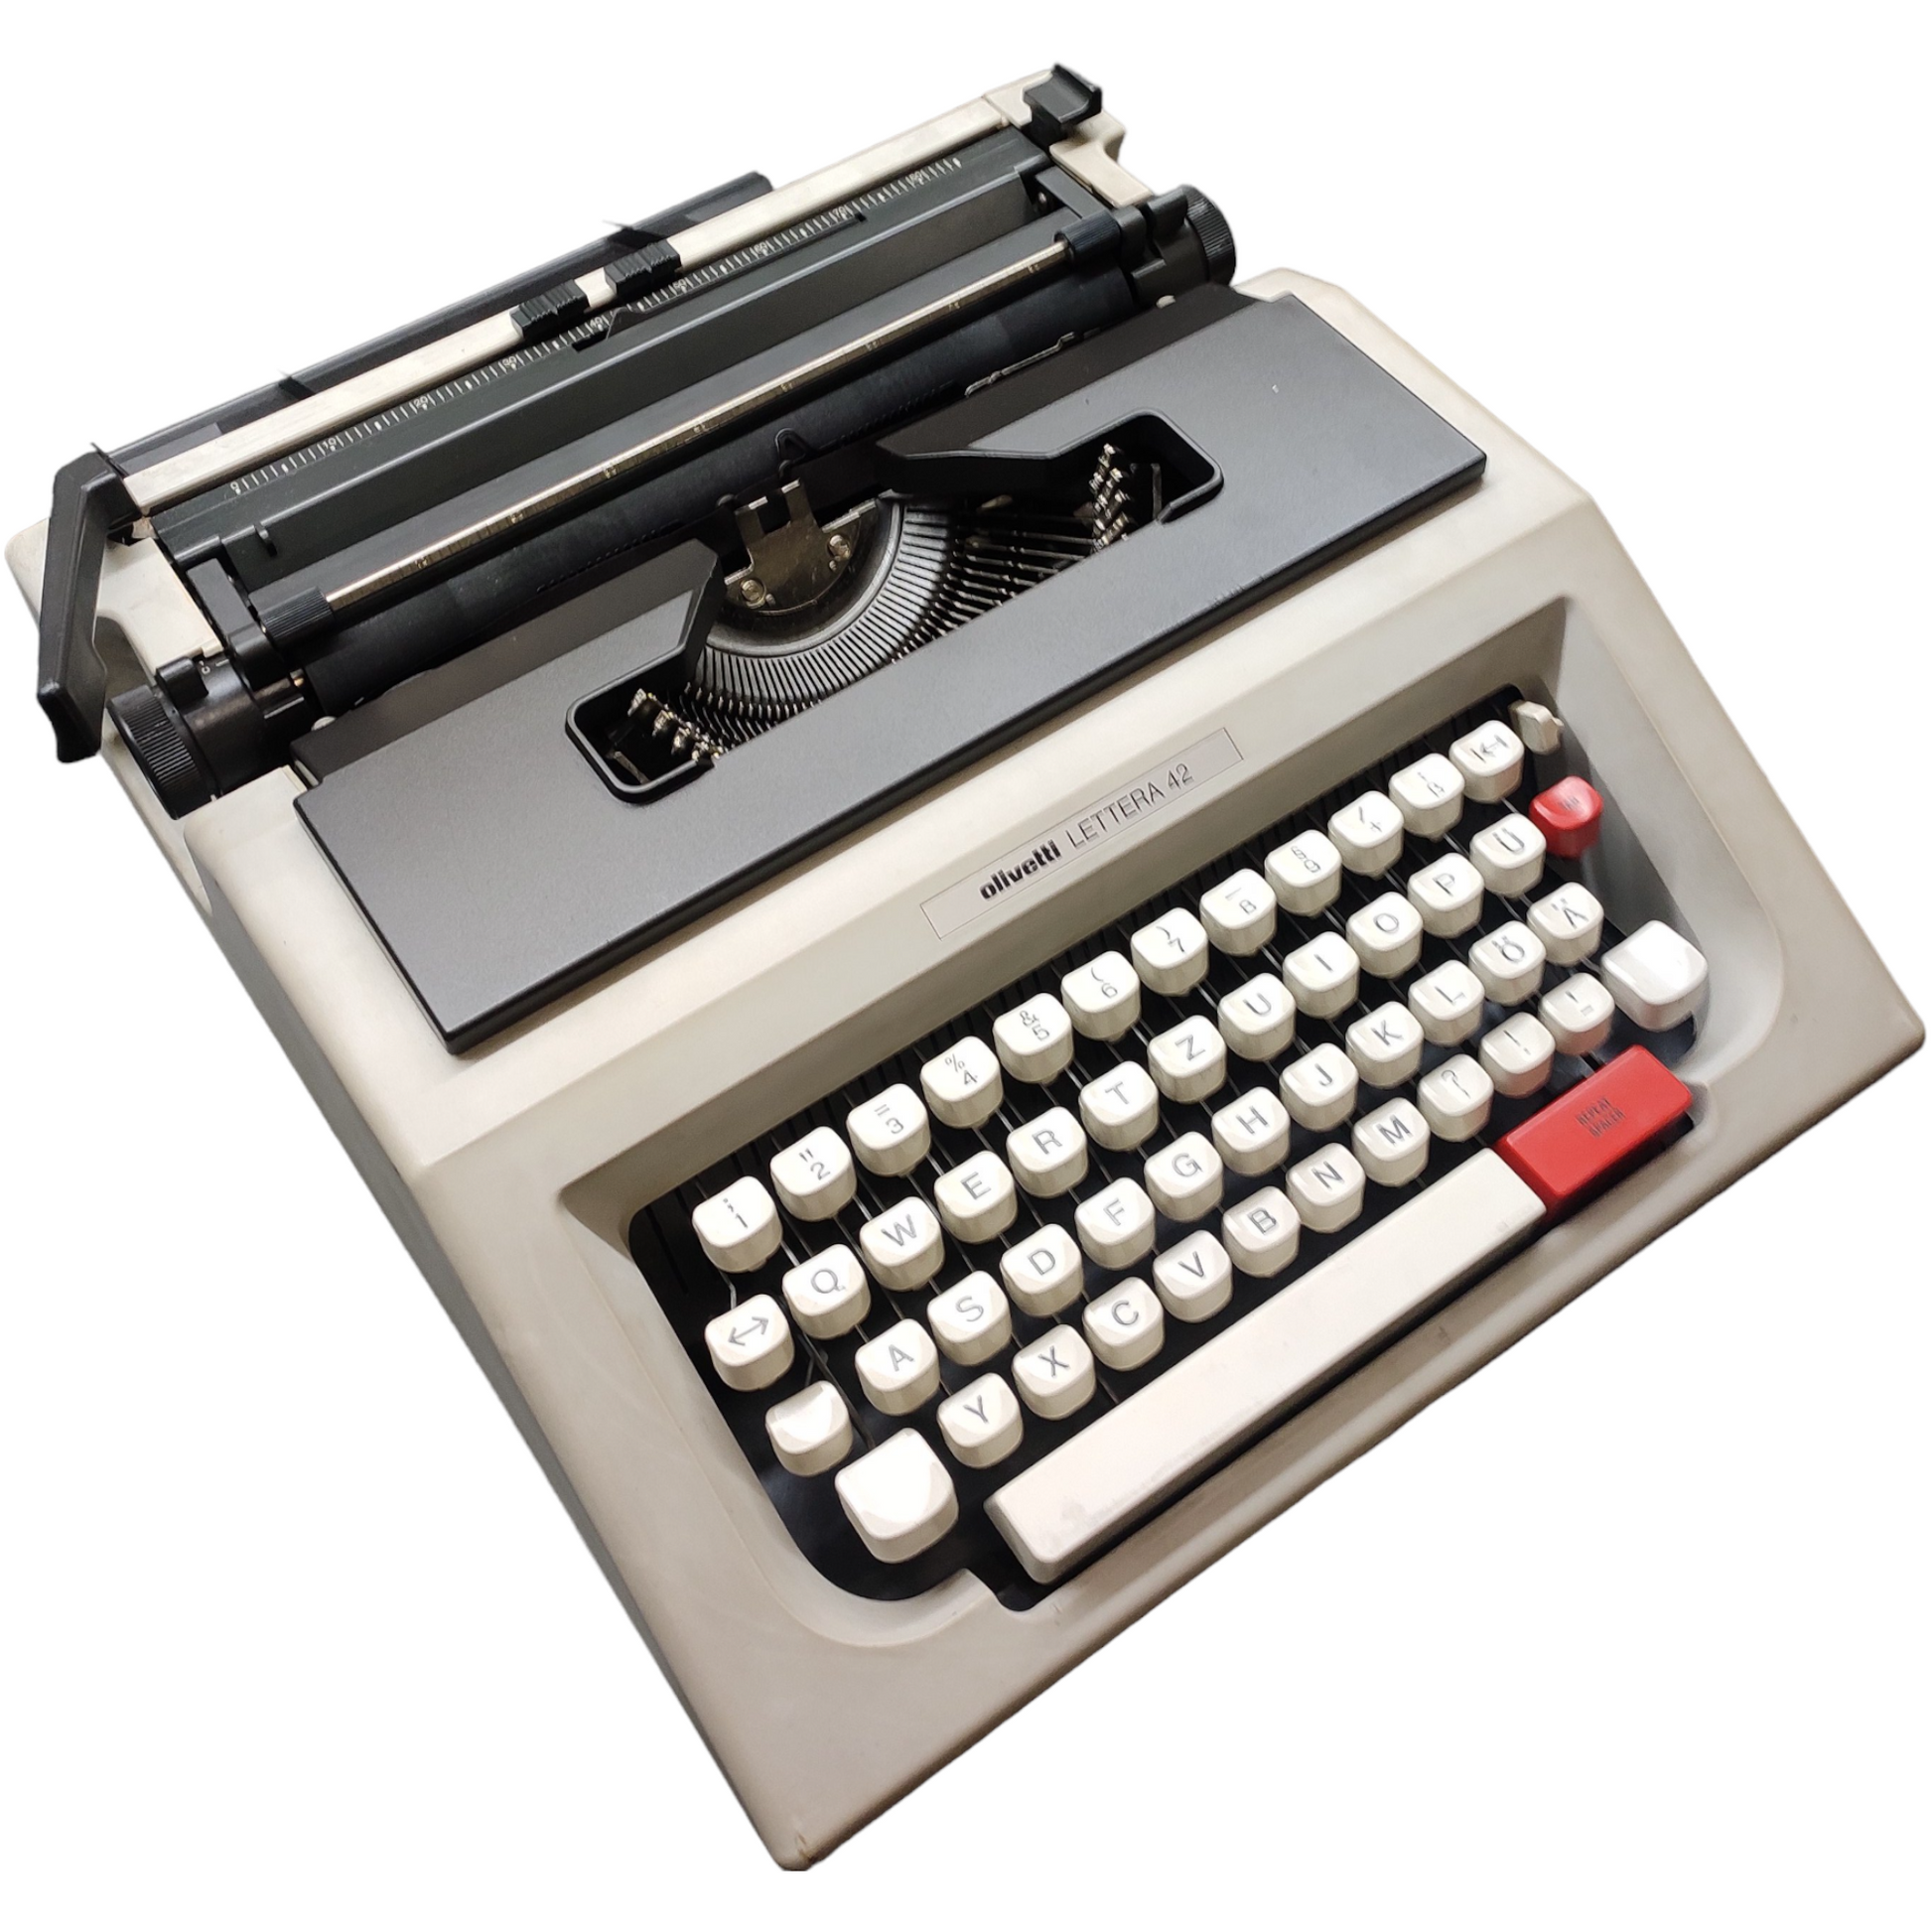 Image of Olivetti Lettera 42 Typewriter with original fibre cover. Available from universaltypewritercompany.in